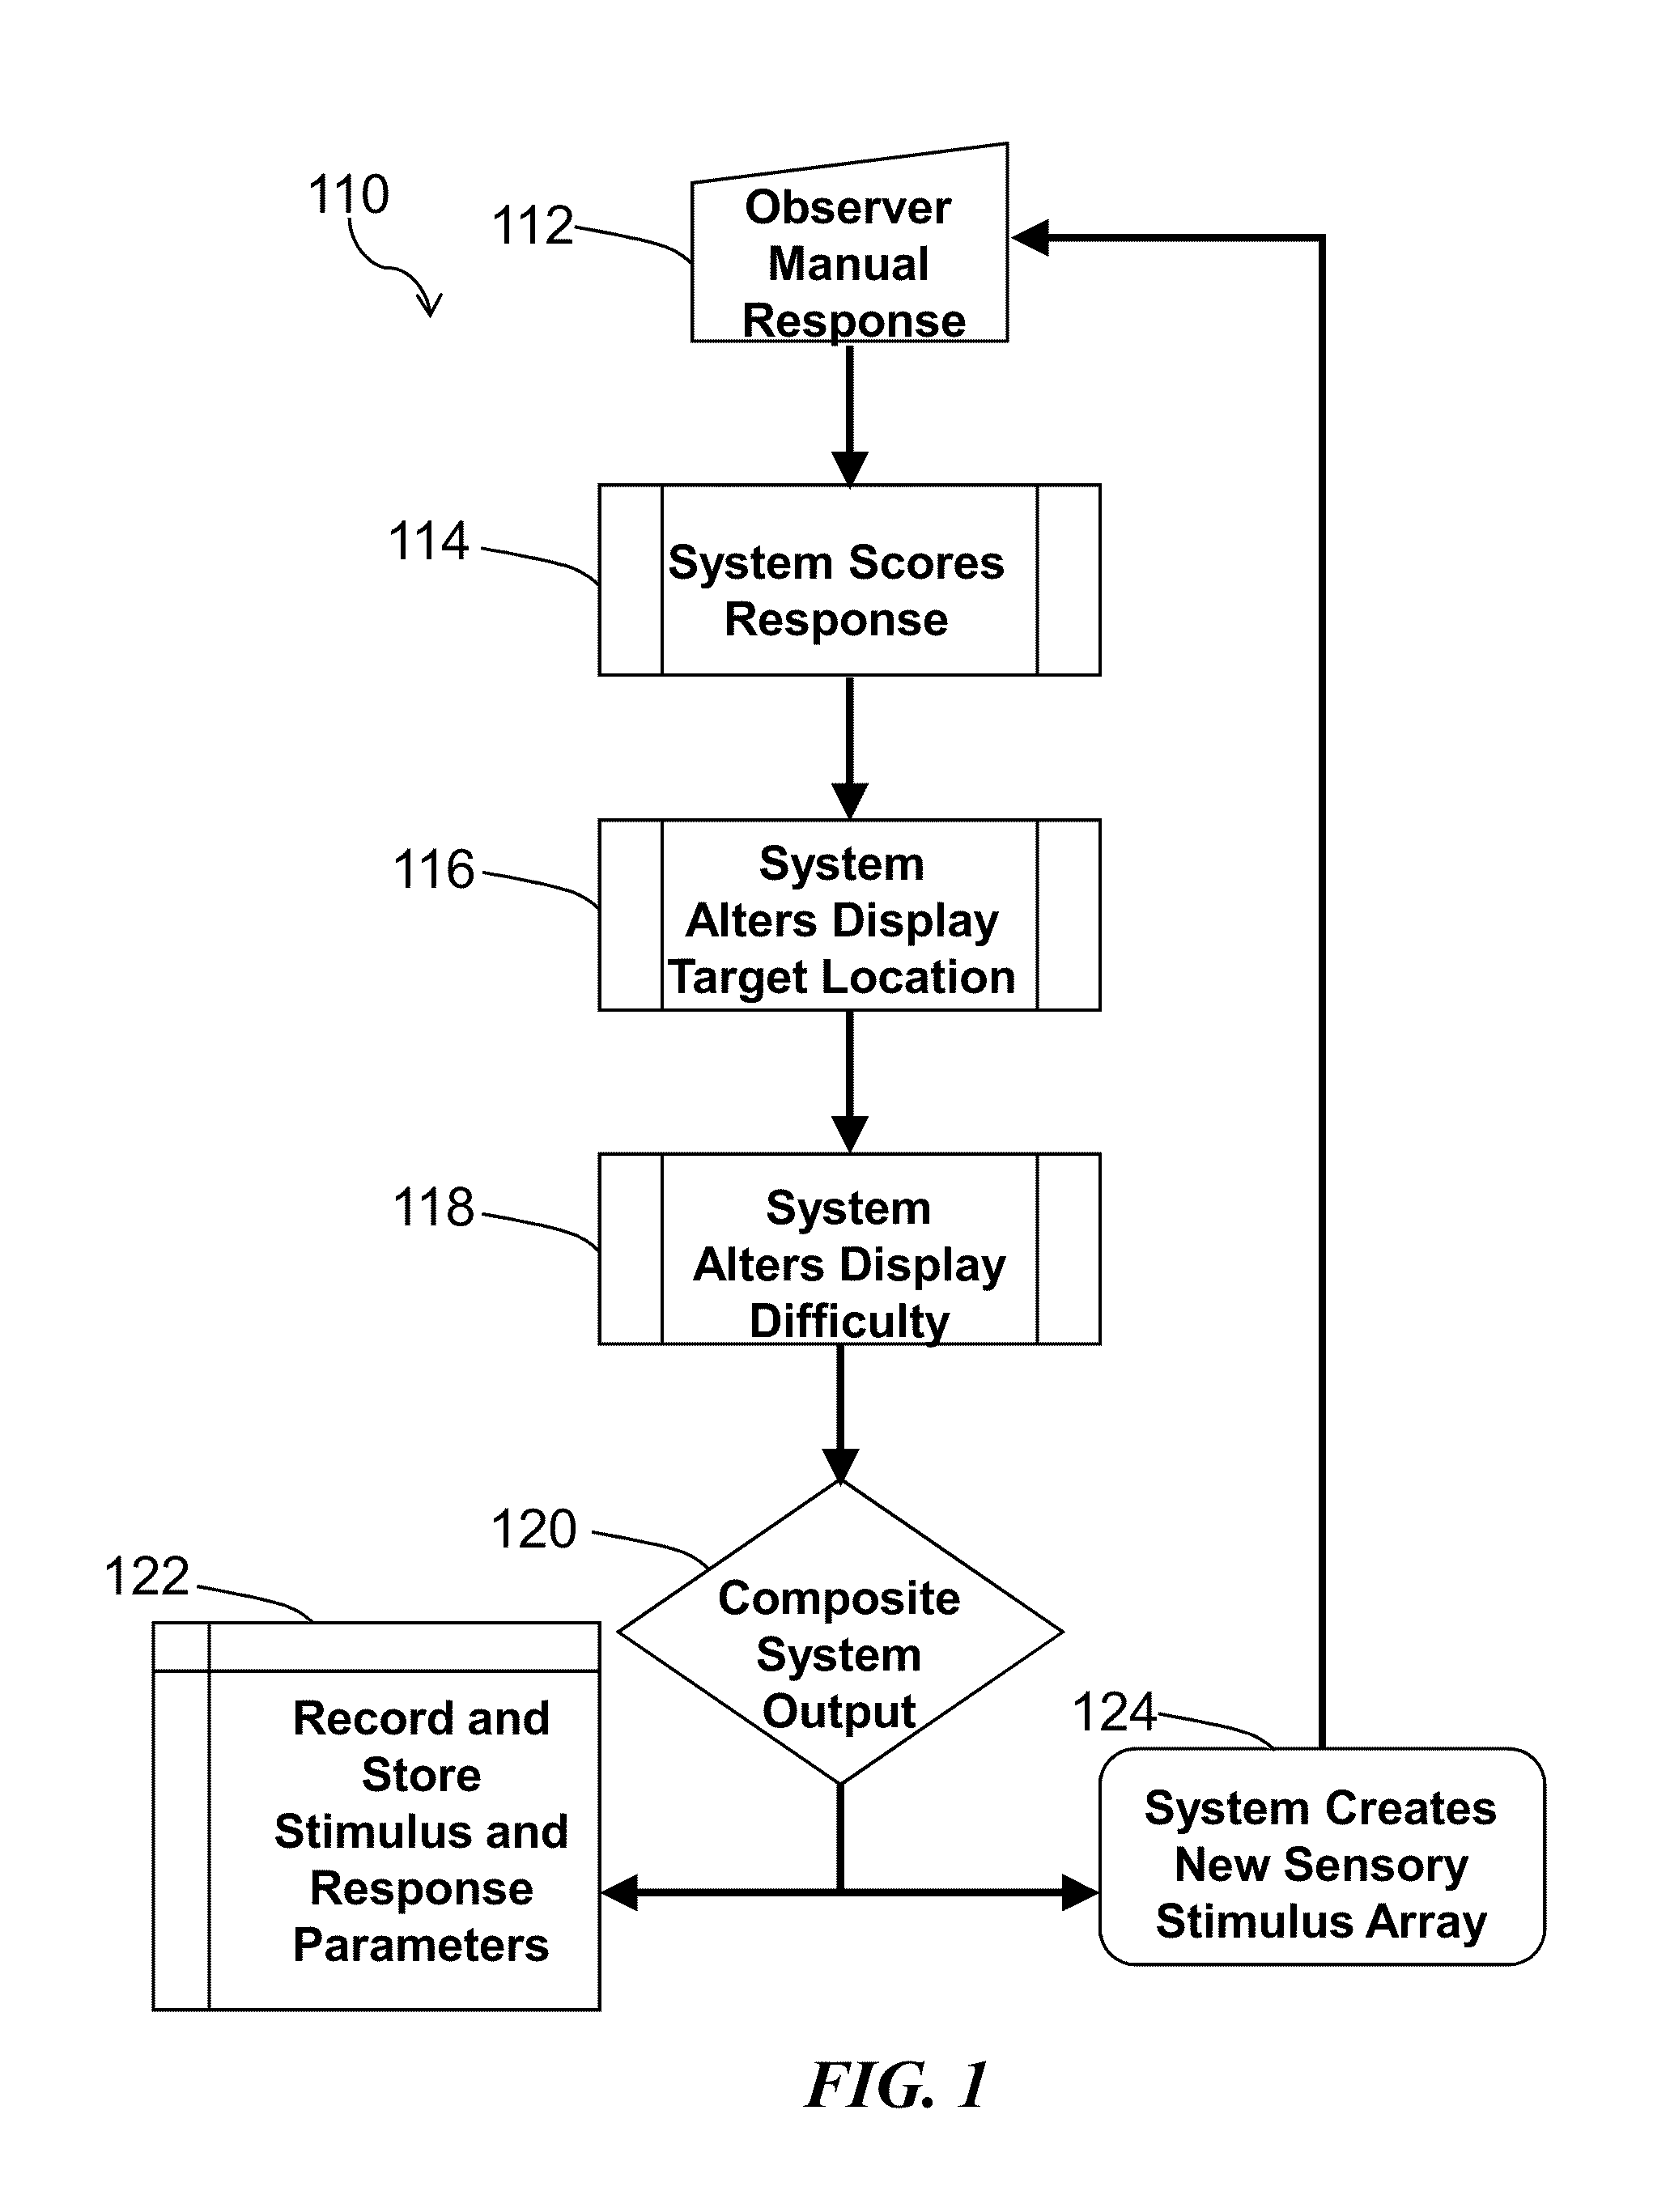 Method and system for quantitative assessment of spatial distractor tasks